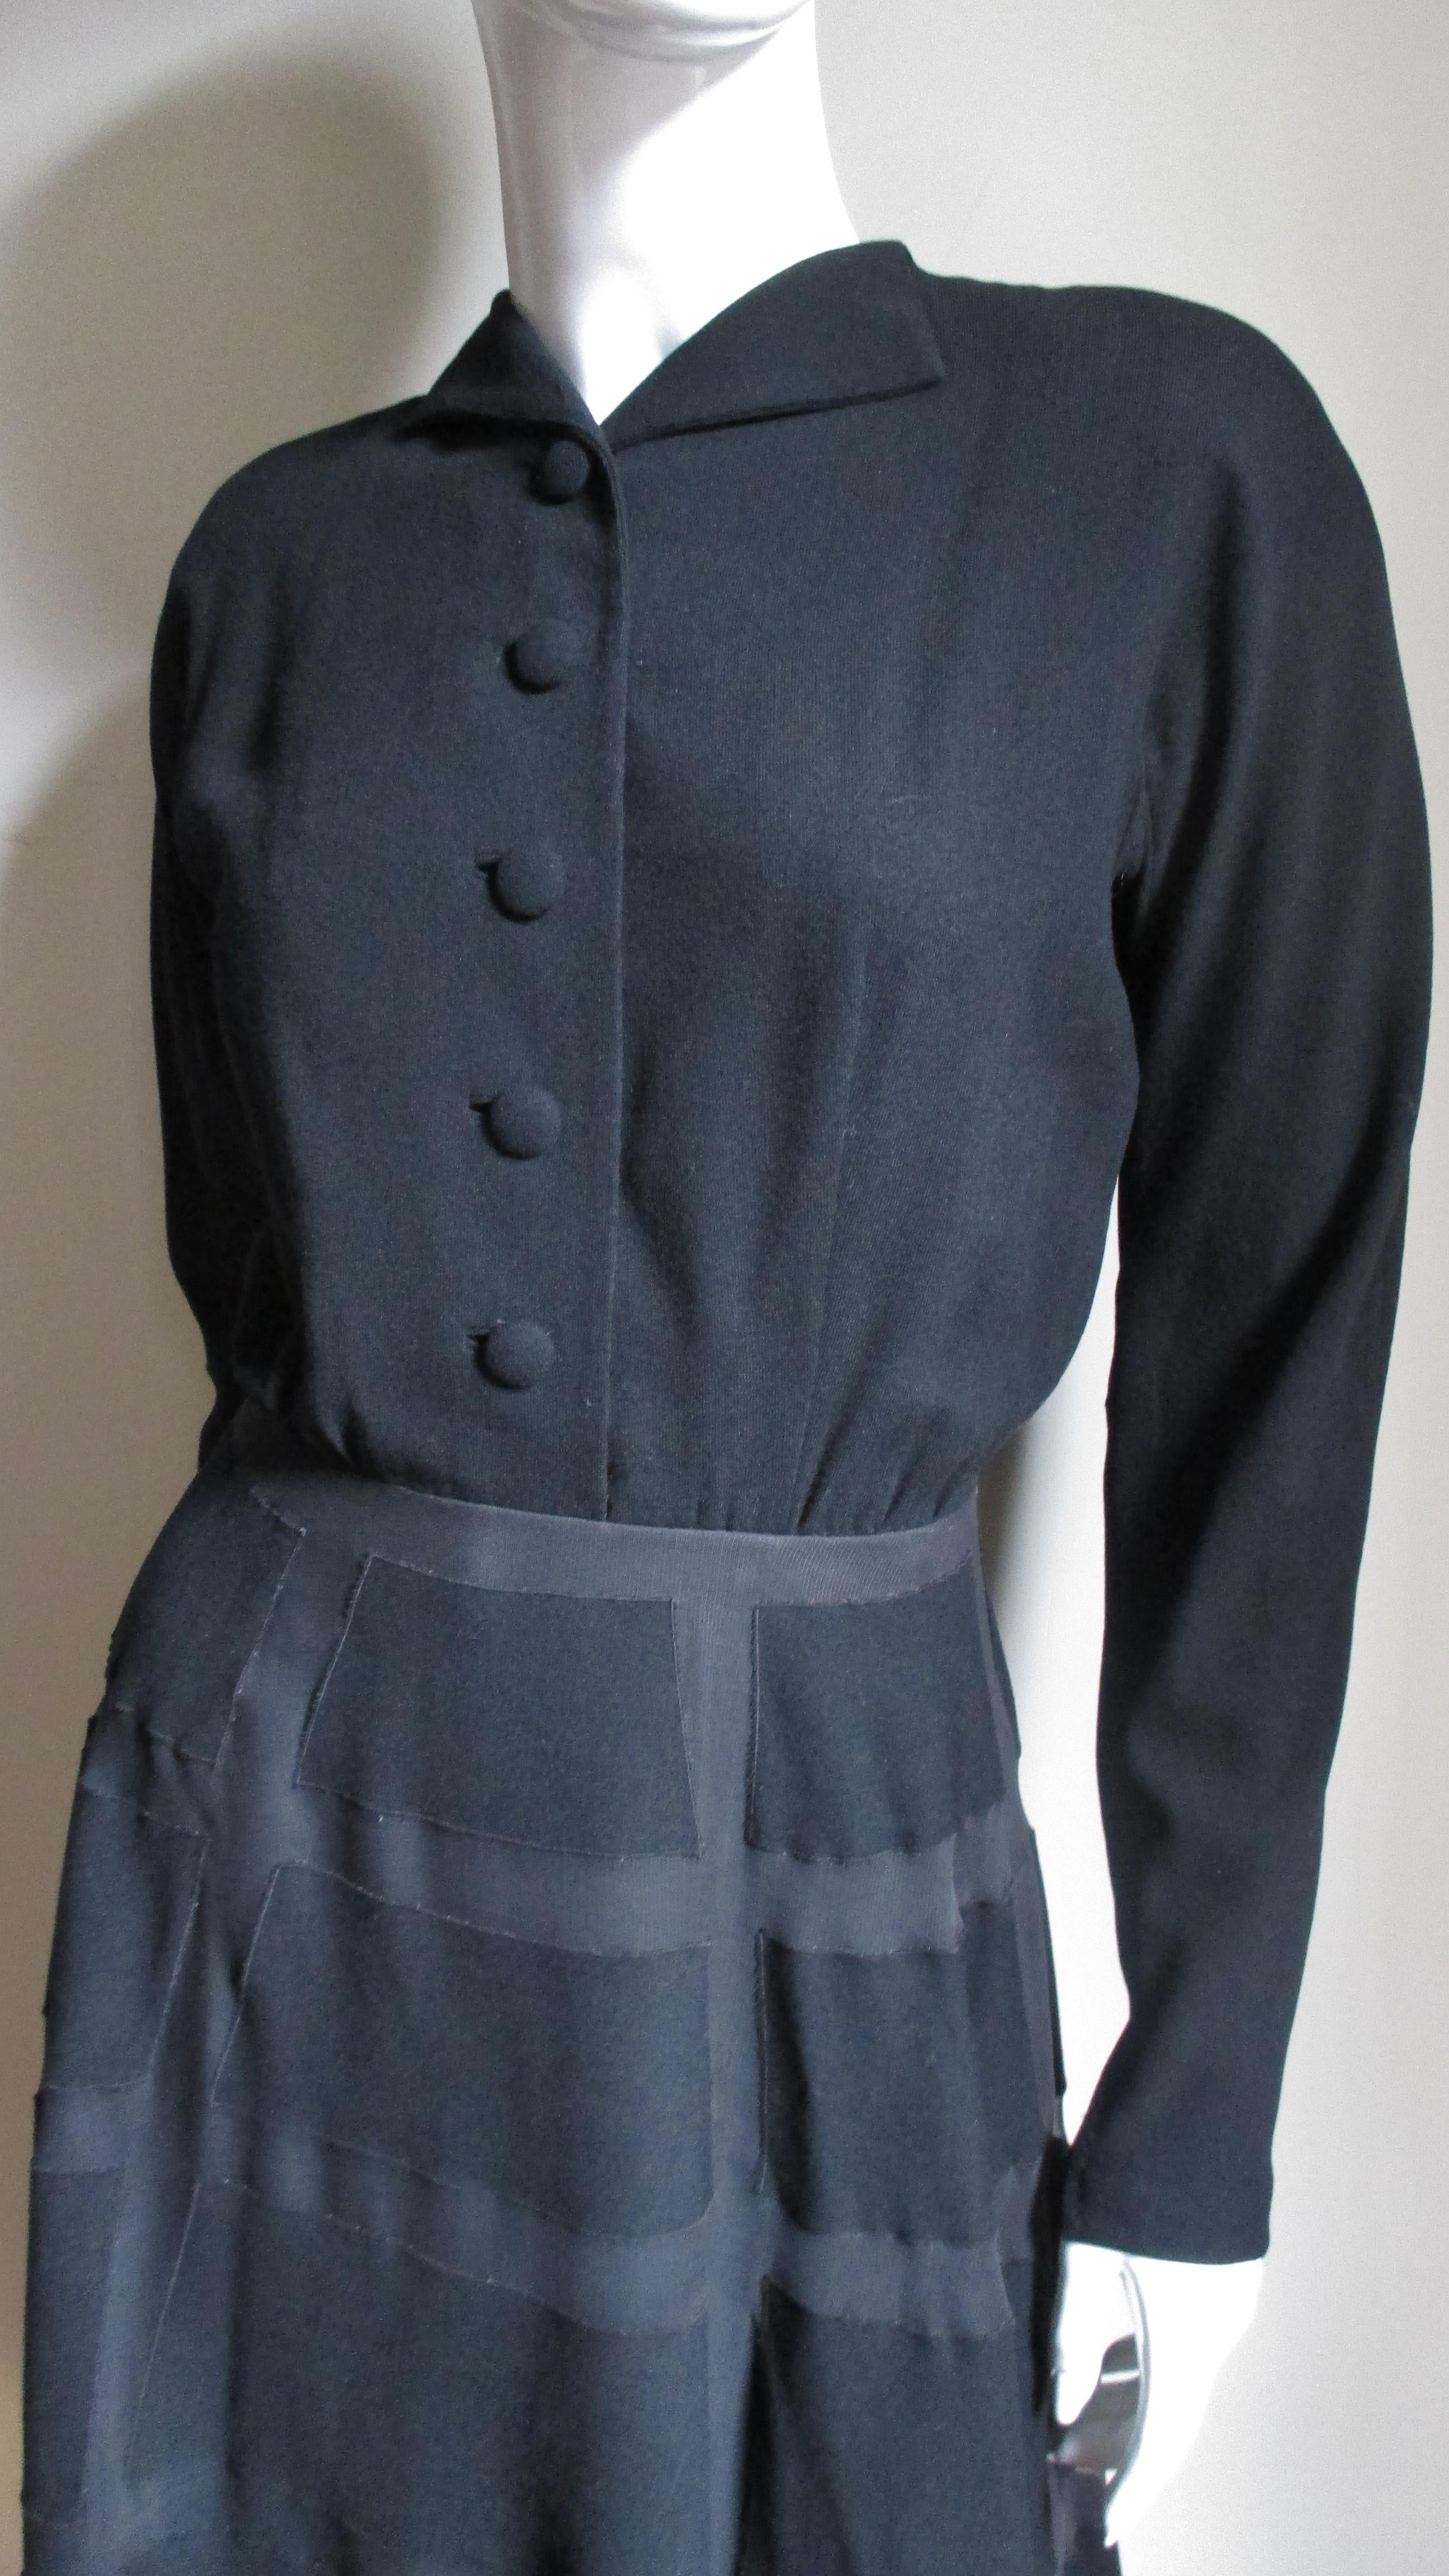 Antonio Castillo was one of the most prominent couturiers to come out of Paris in the 1940s and joined the house of Lanvin in 1950.  This is a stunning black fine wool dress with couture detailing. It has zipper cuffed dolman sleeves, a wing collar